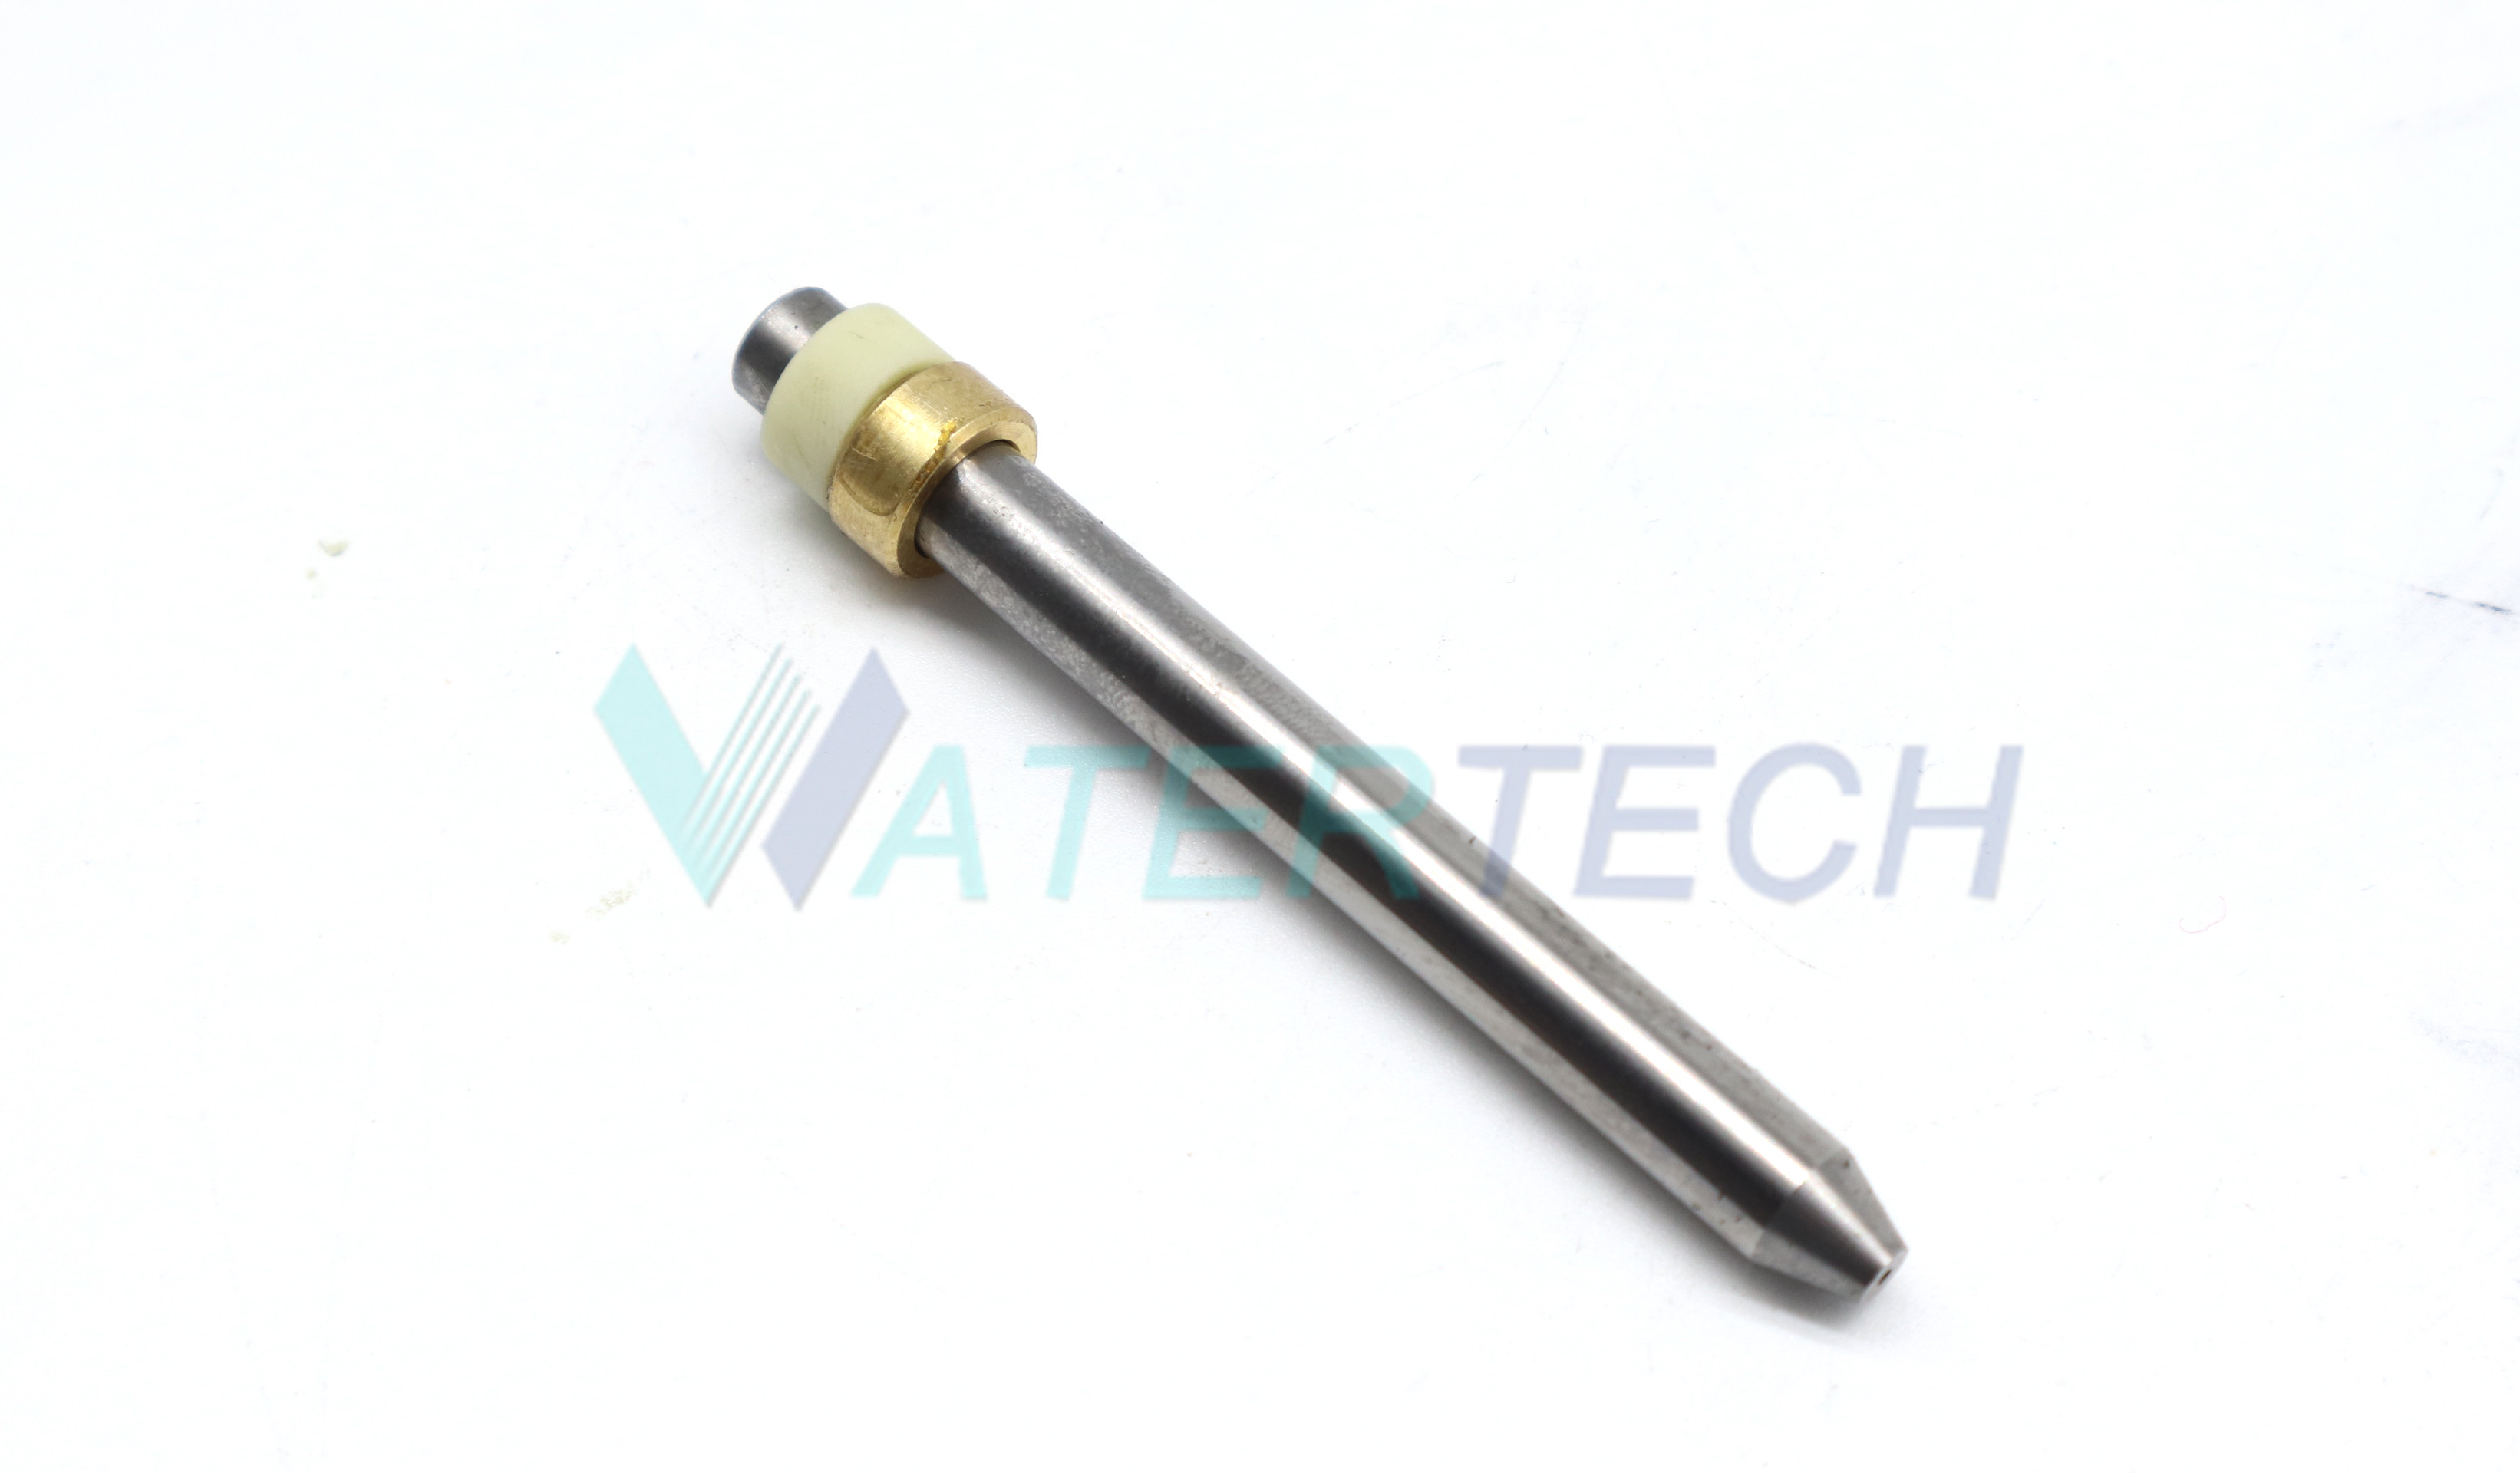 .281" X .040" X 3" Nozzle for Waterjet Cutting Machine